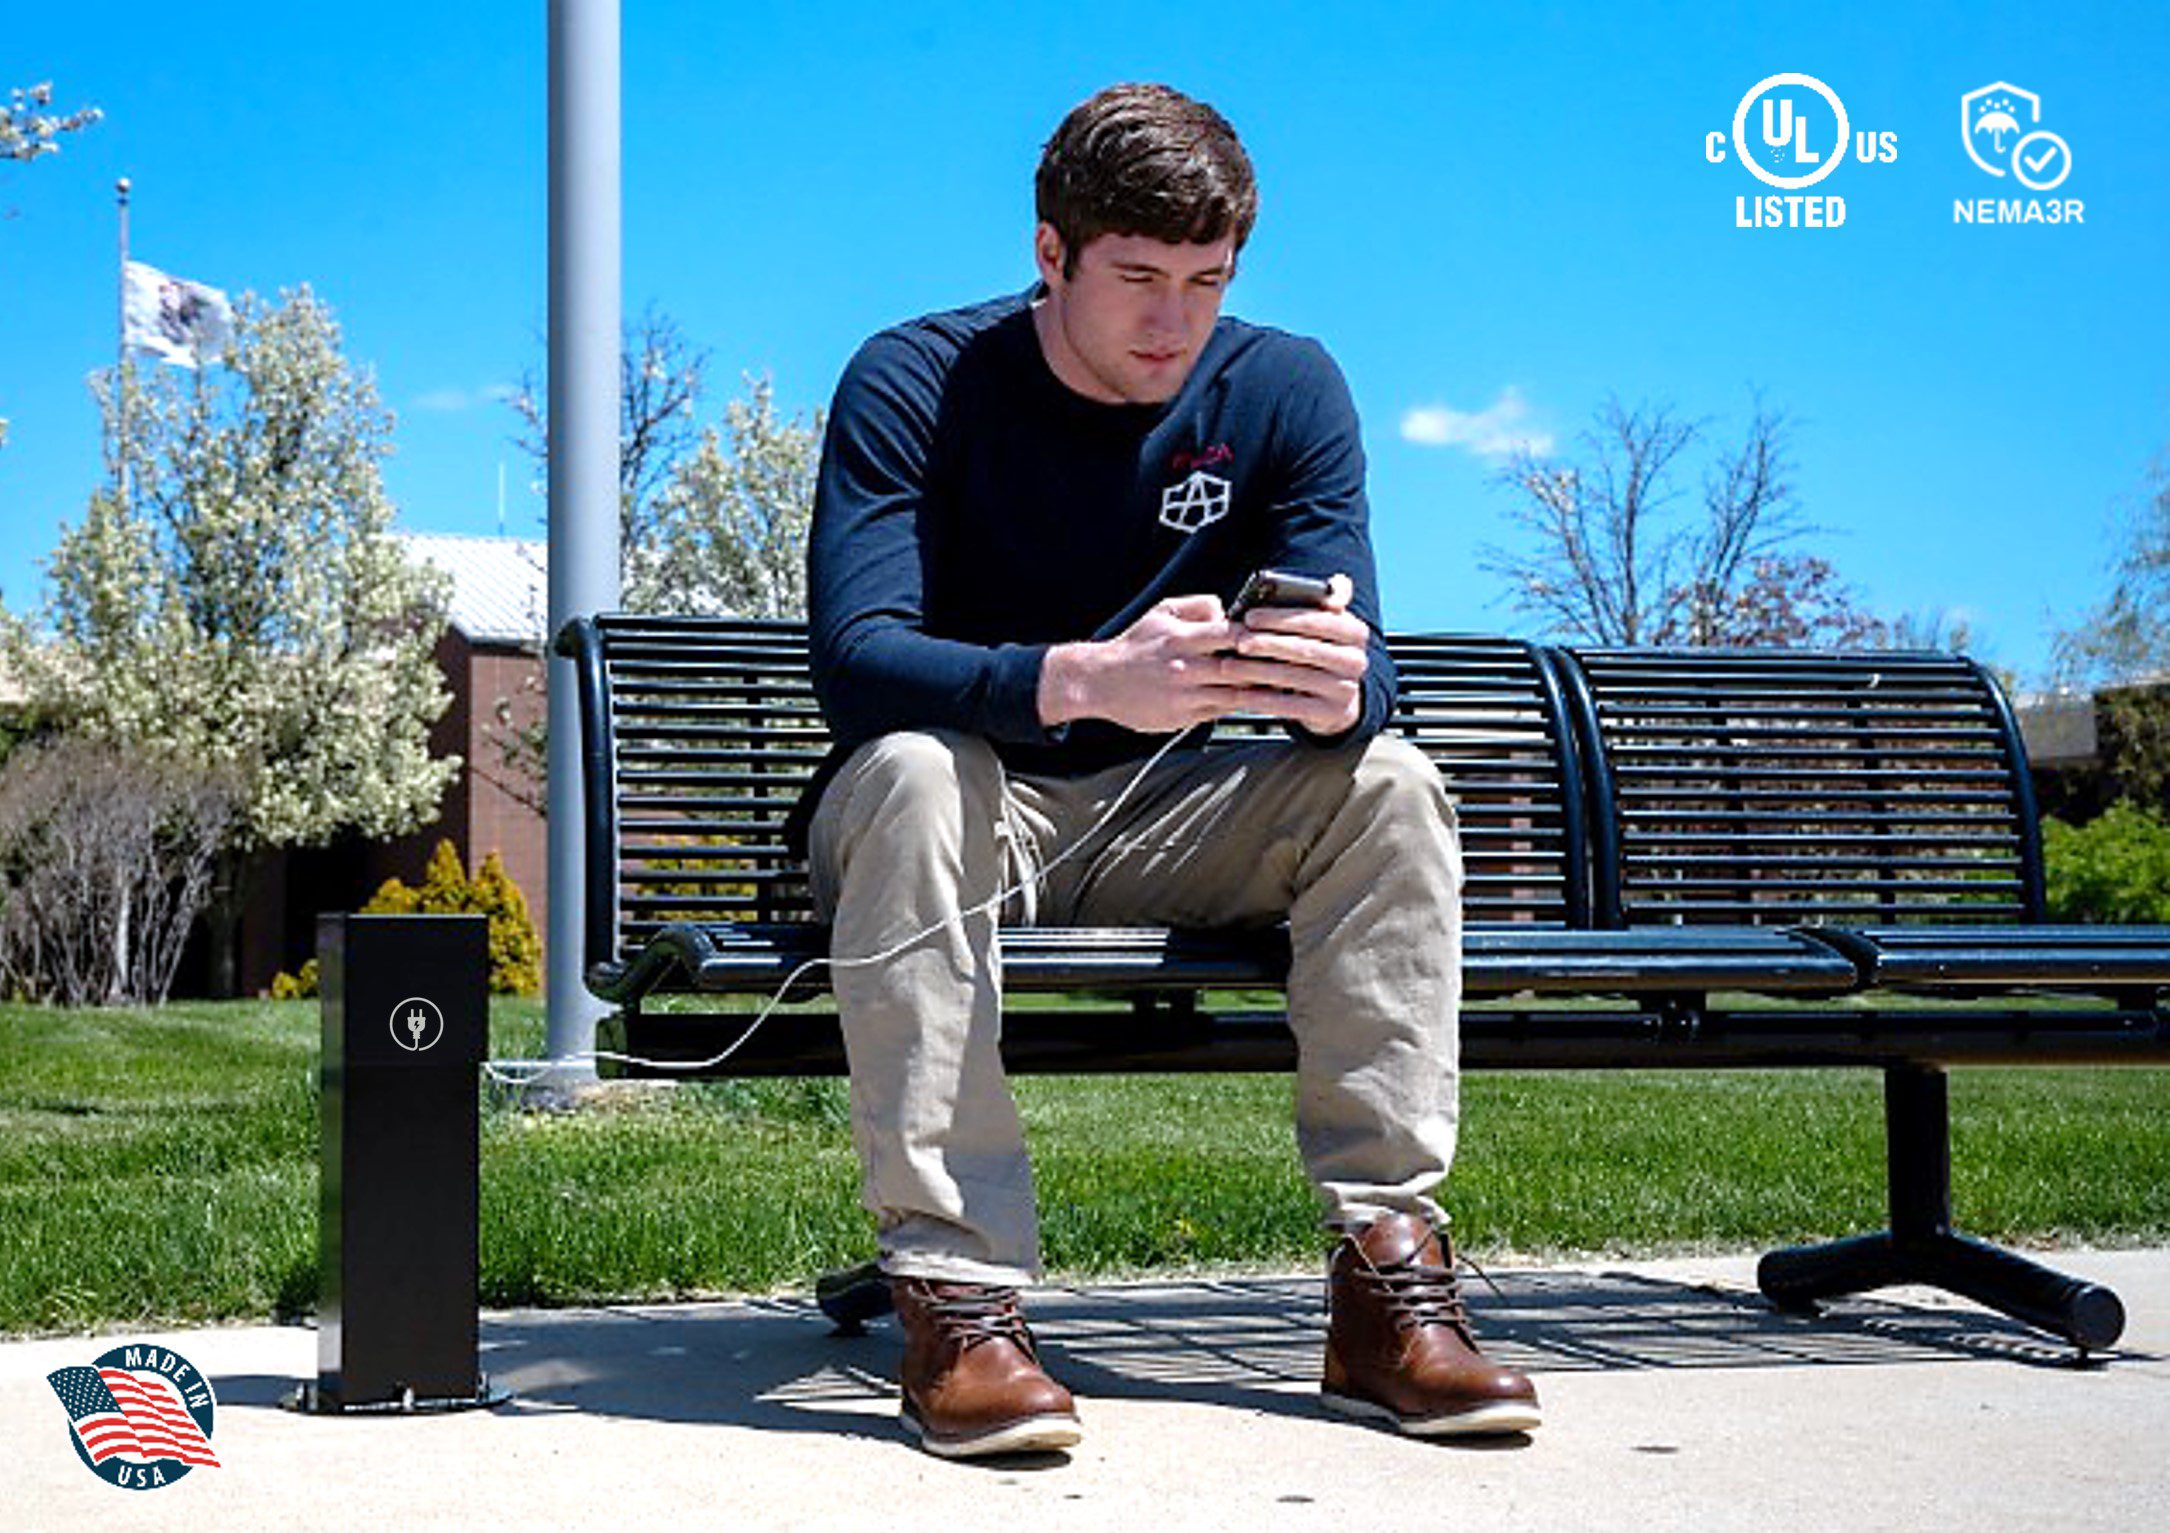 A college student using his phone while plugged into a Pedoc power pedestal